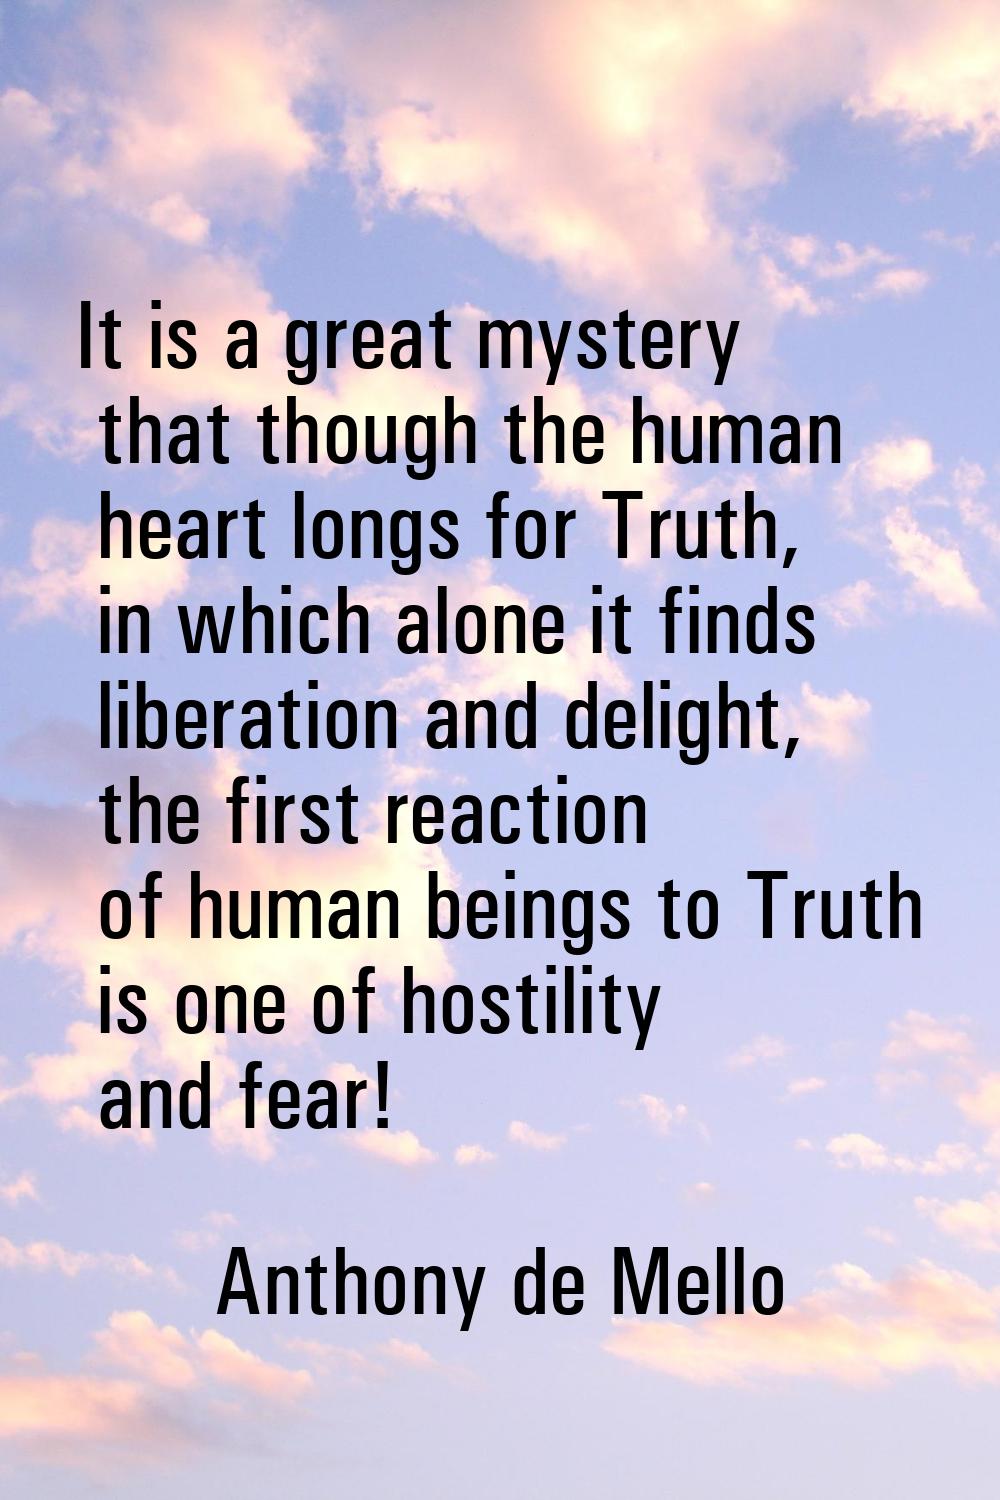 It is a great mystery that though the human heart longs for Truth, in which alone it finds liberati